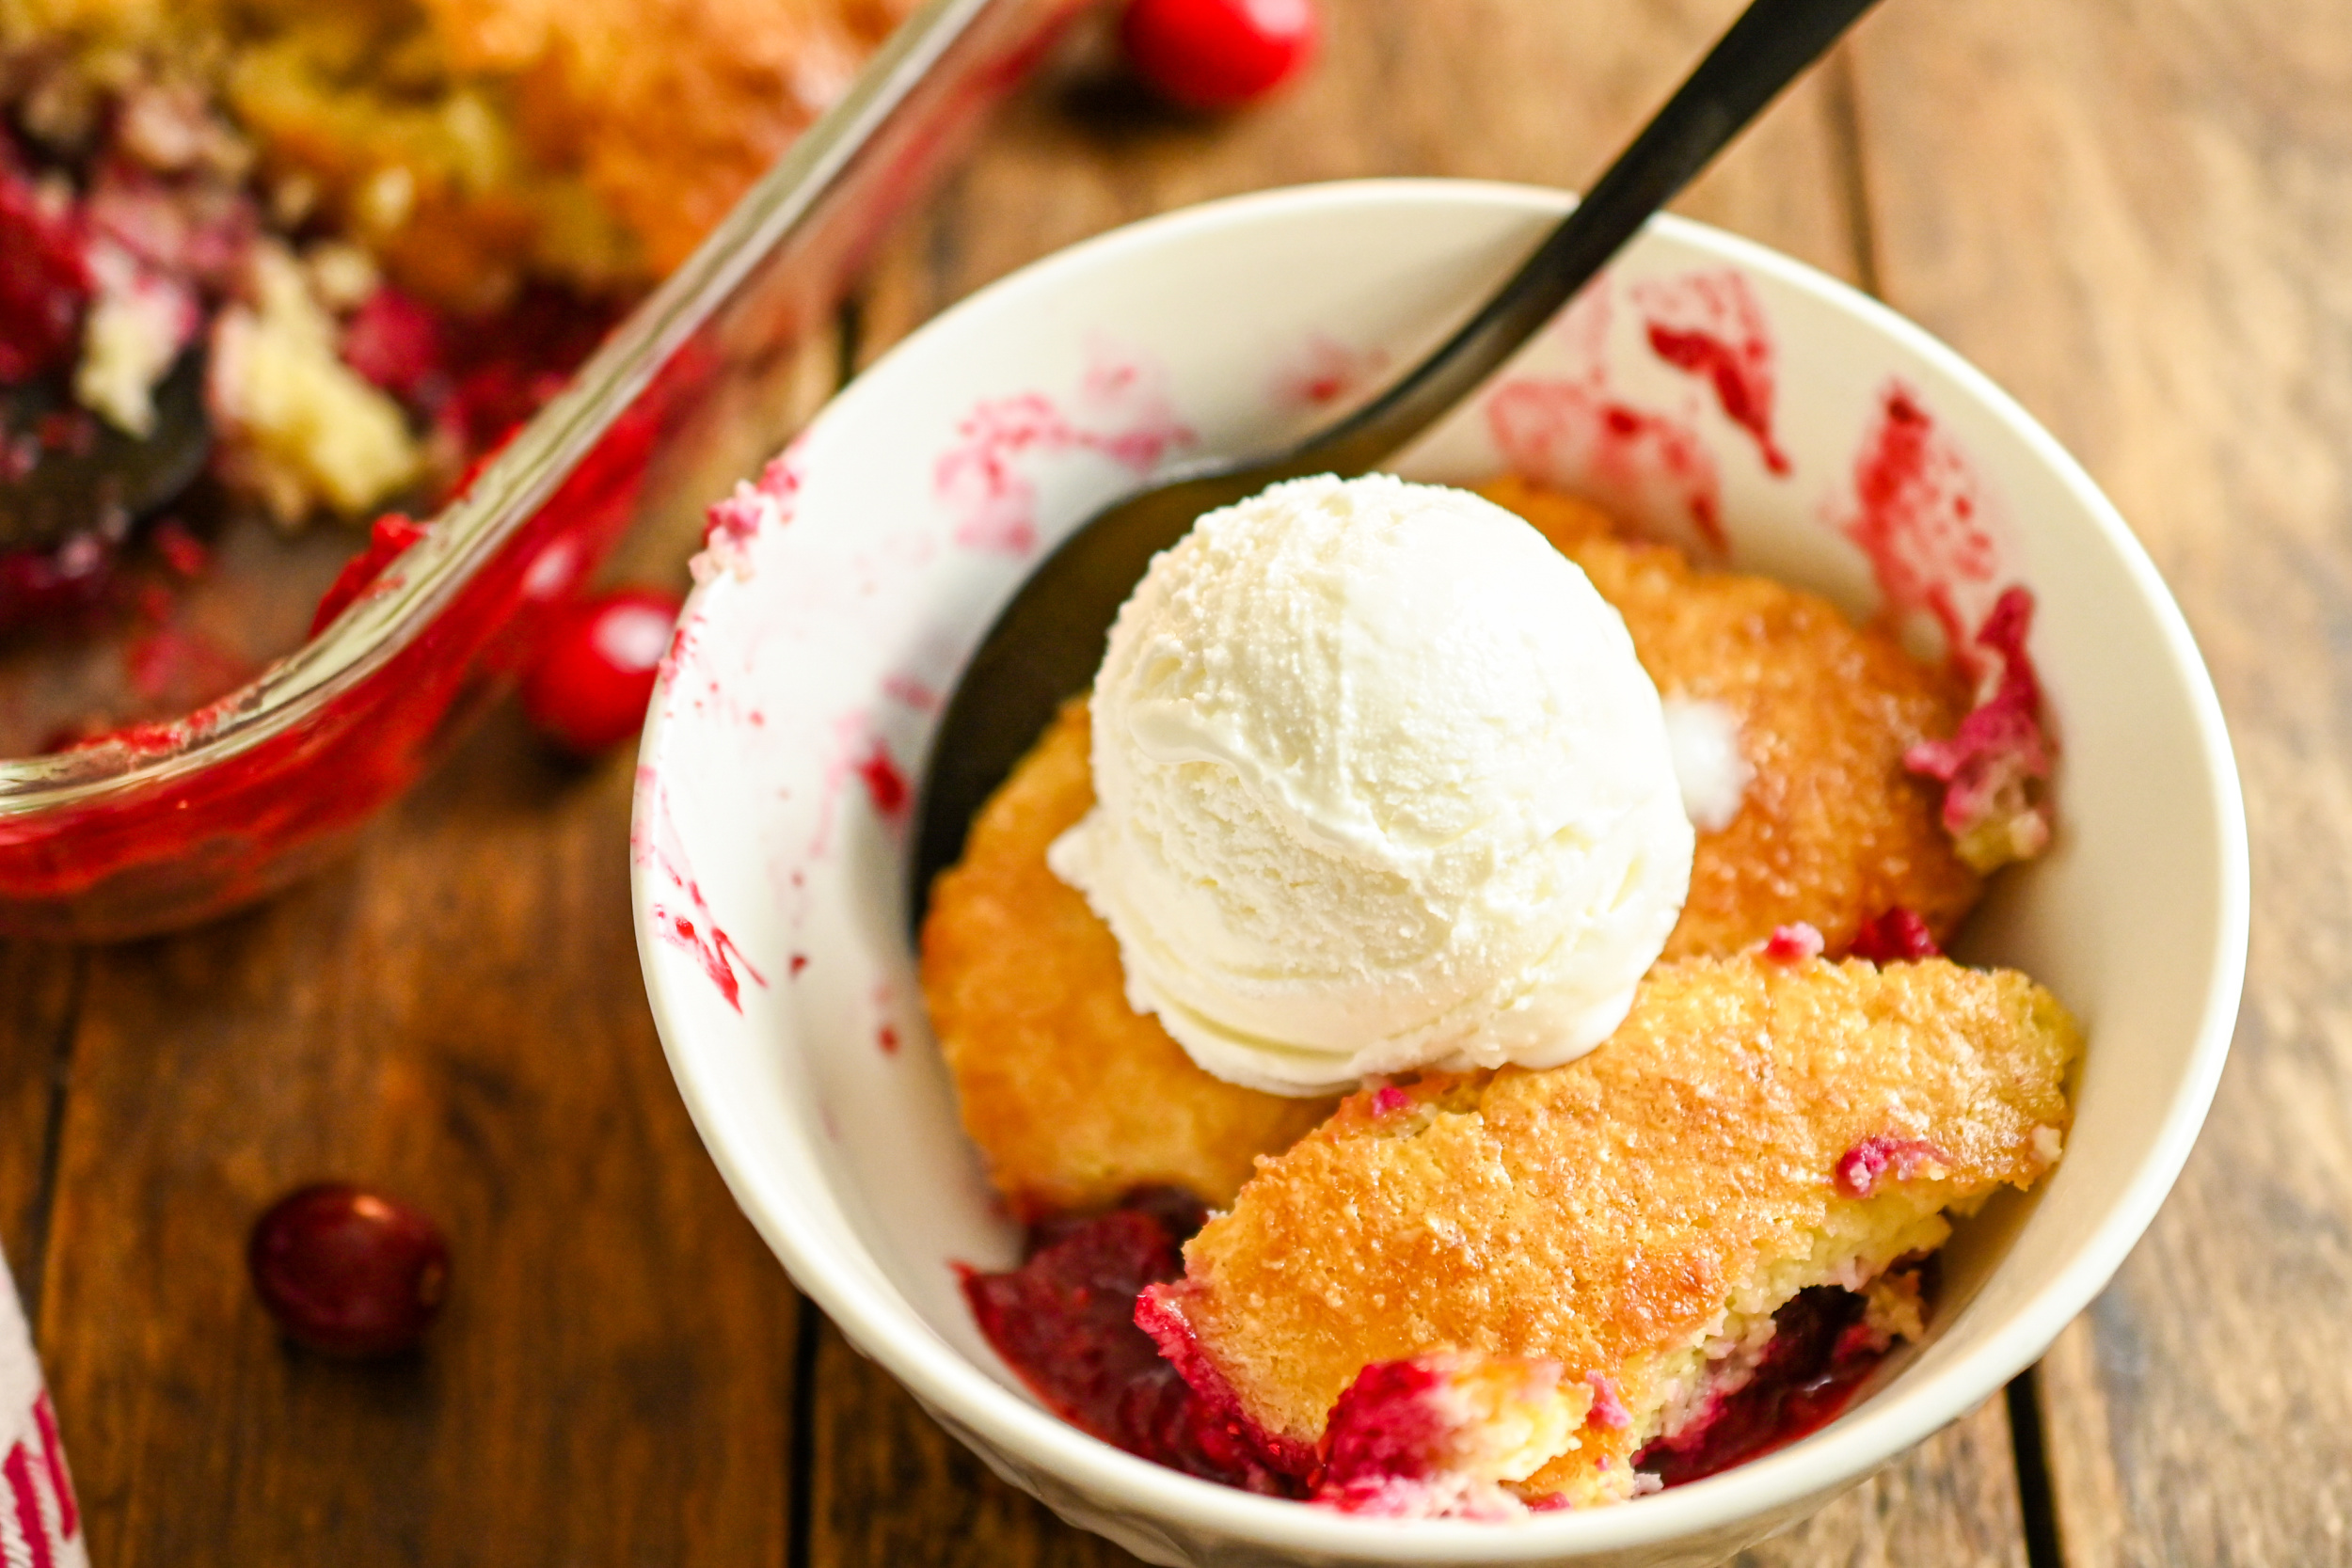 Keto cranberry cobbler served in a small white plate with a scoop of keto vanilla ice cream